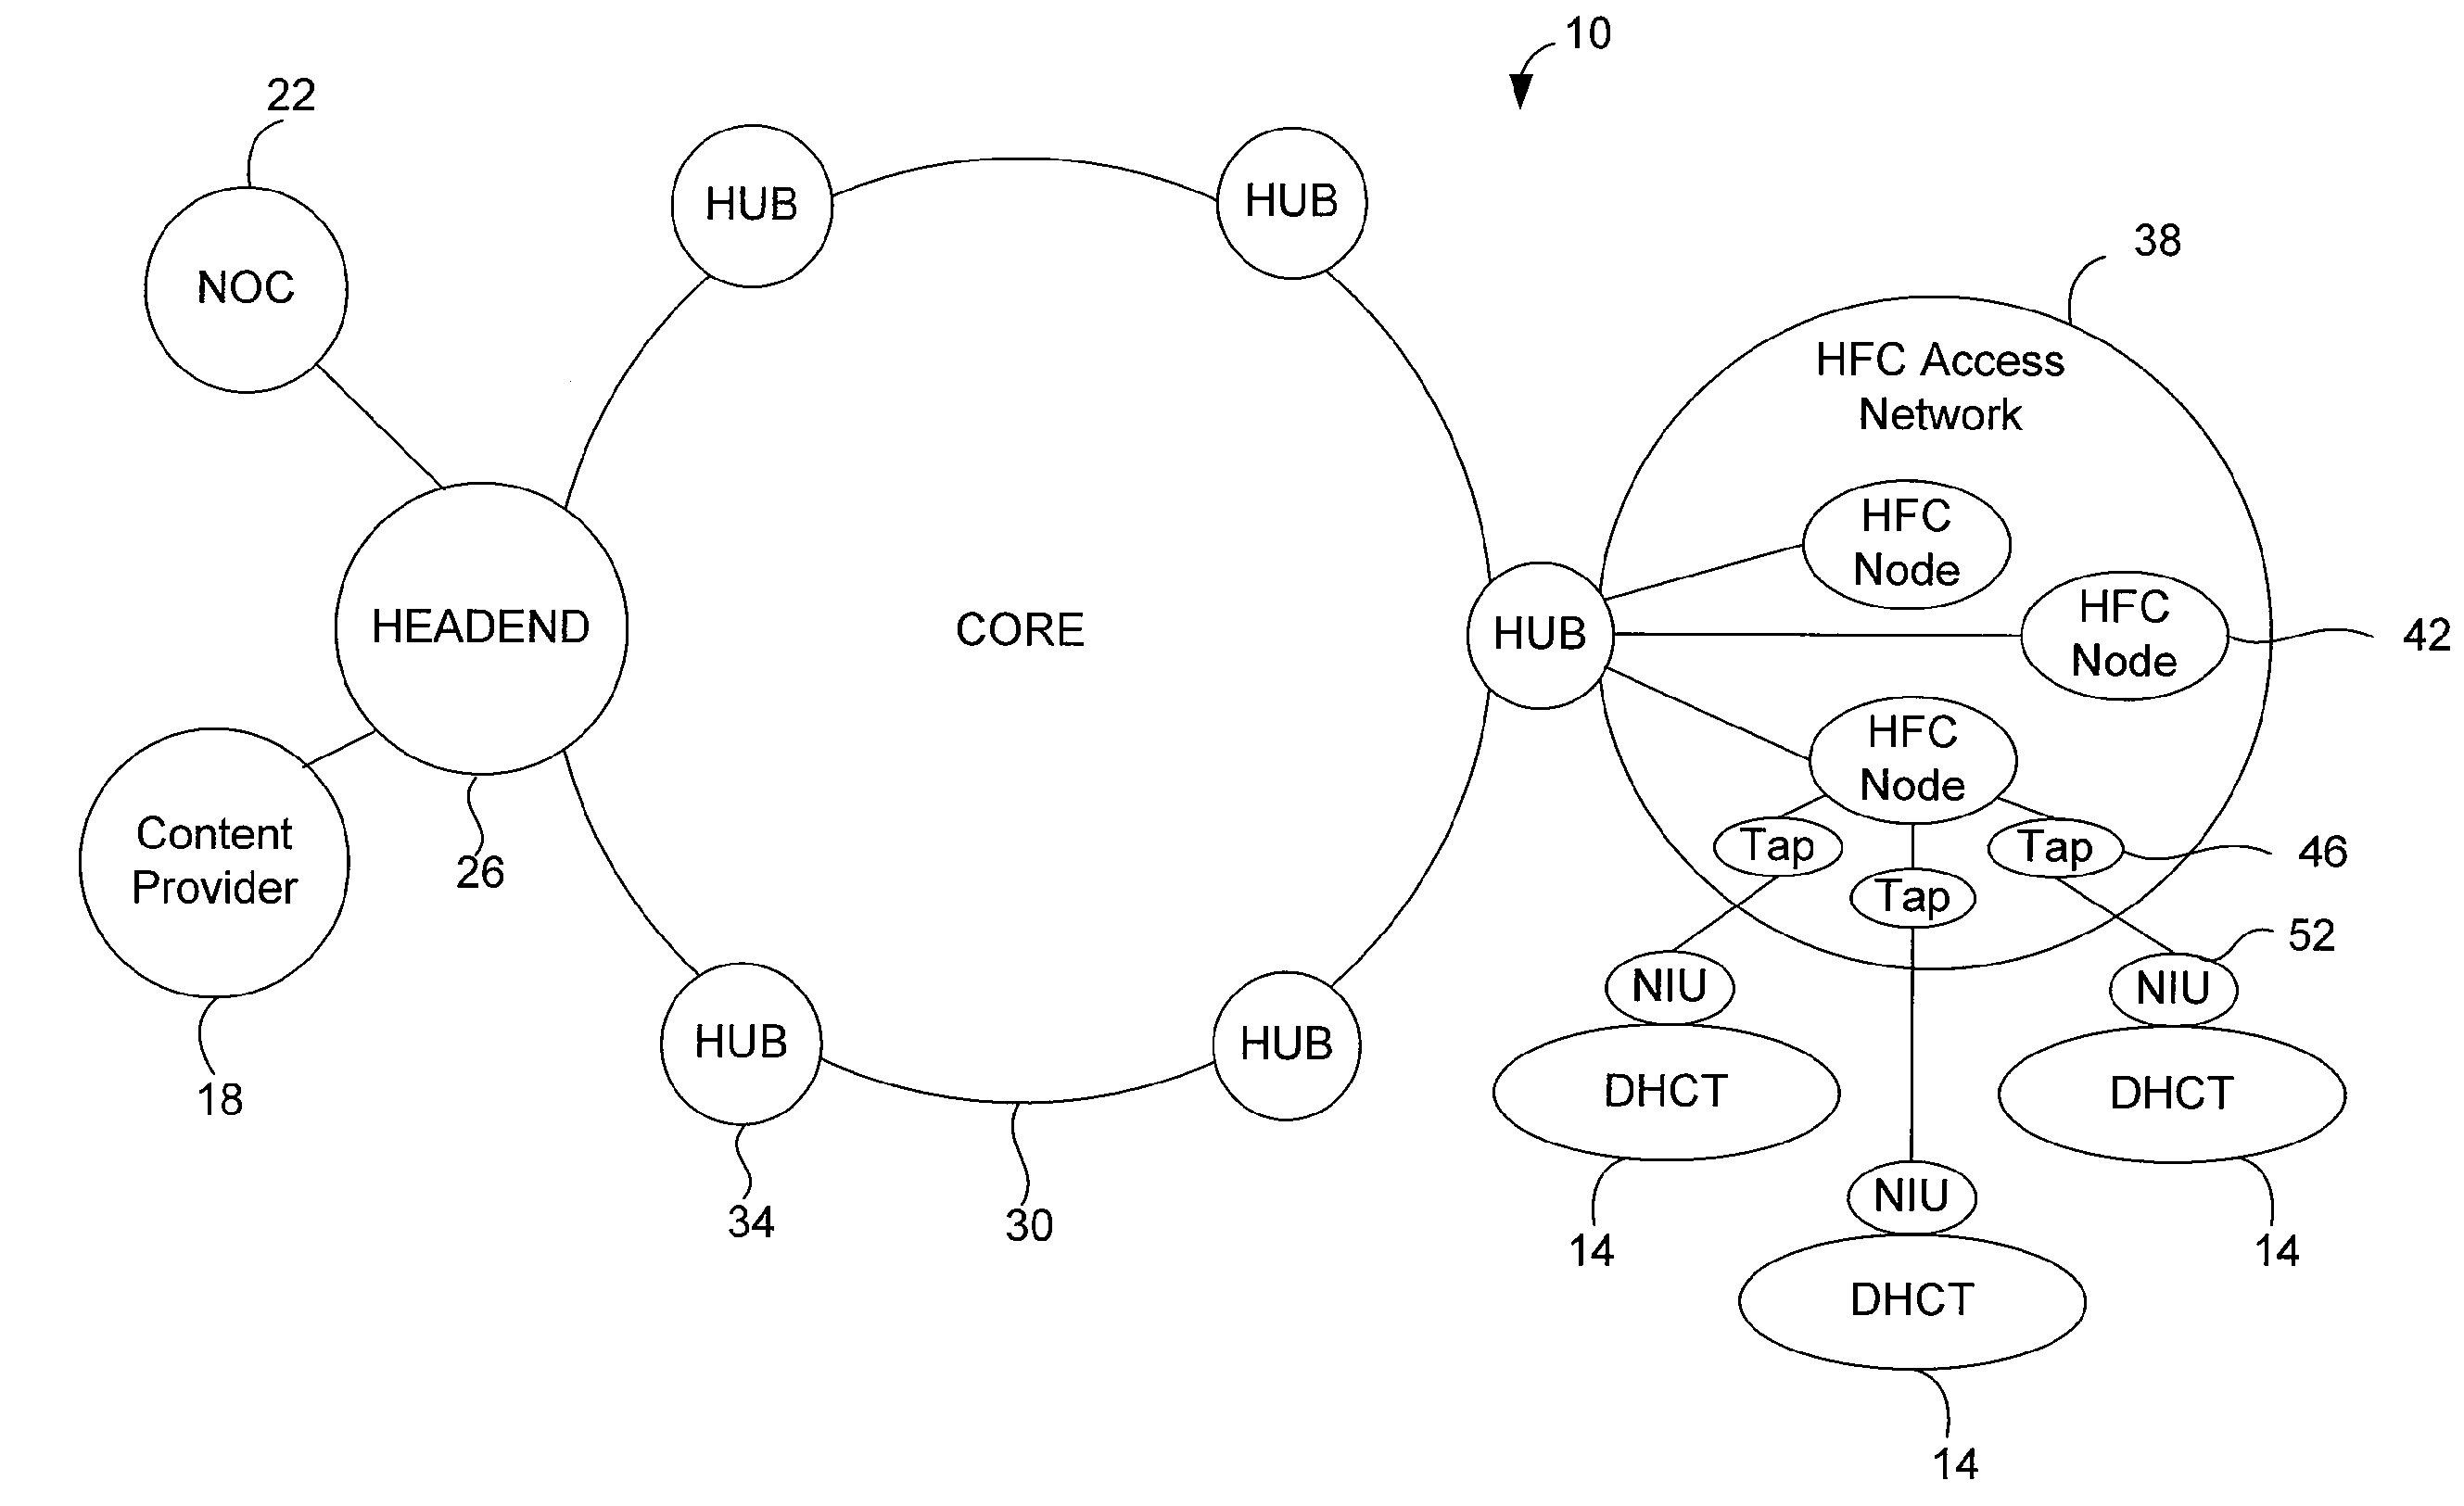 Systems and Methods for Dynamically Allocating Bandwidth in a Digital Broadband Delivery System